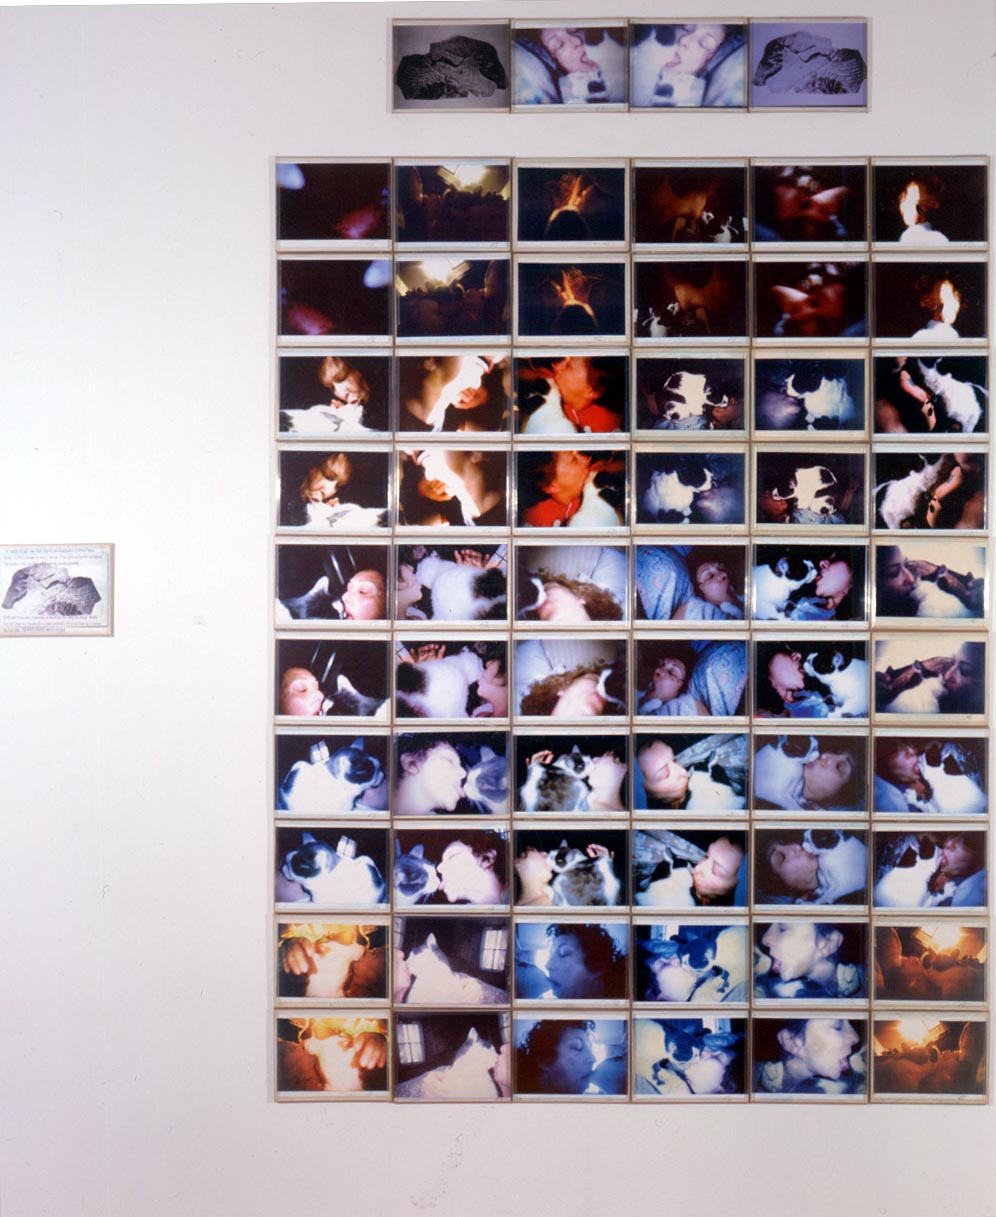 65 panels with images of Schneemann kissing her cat